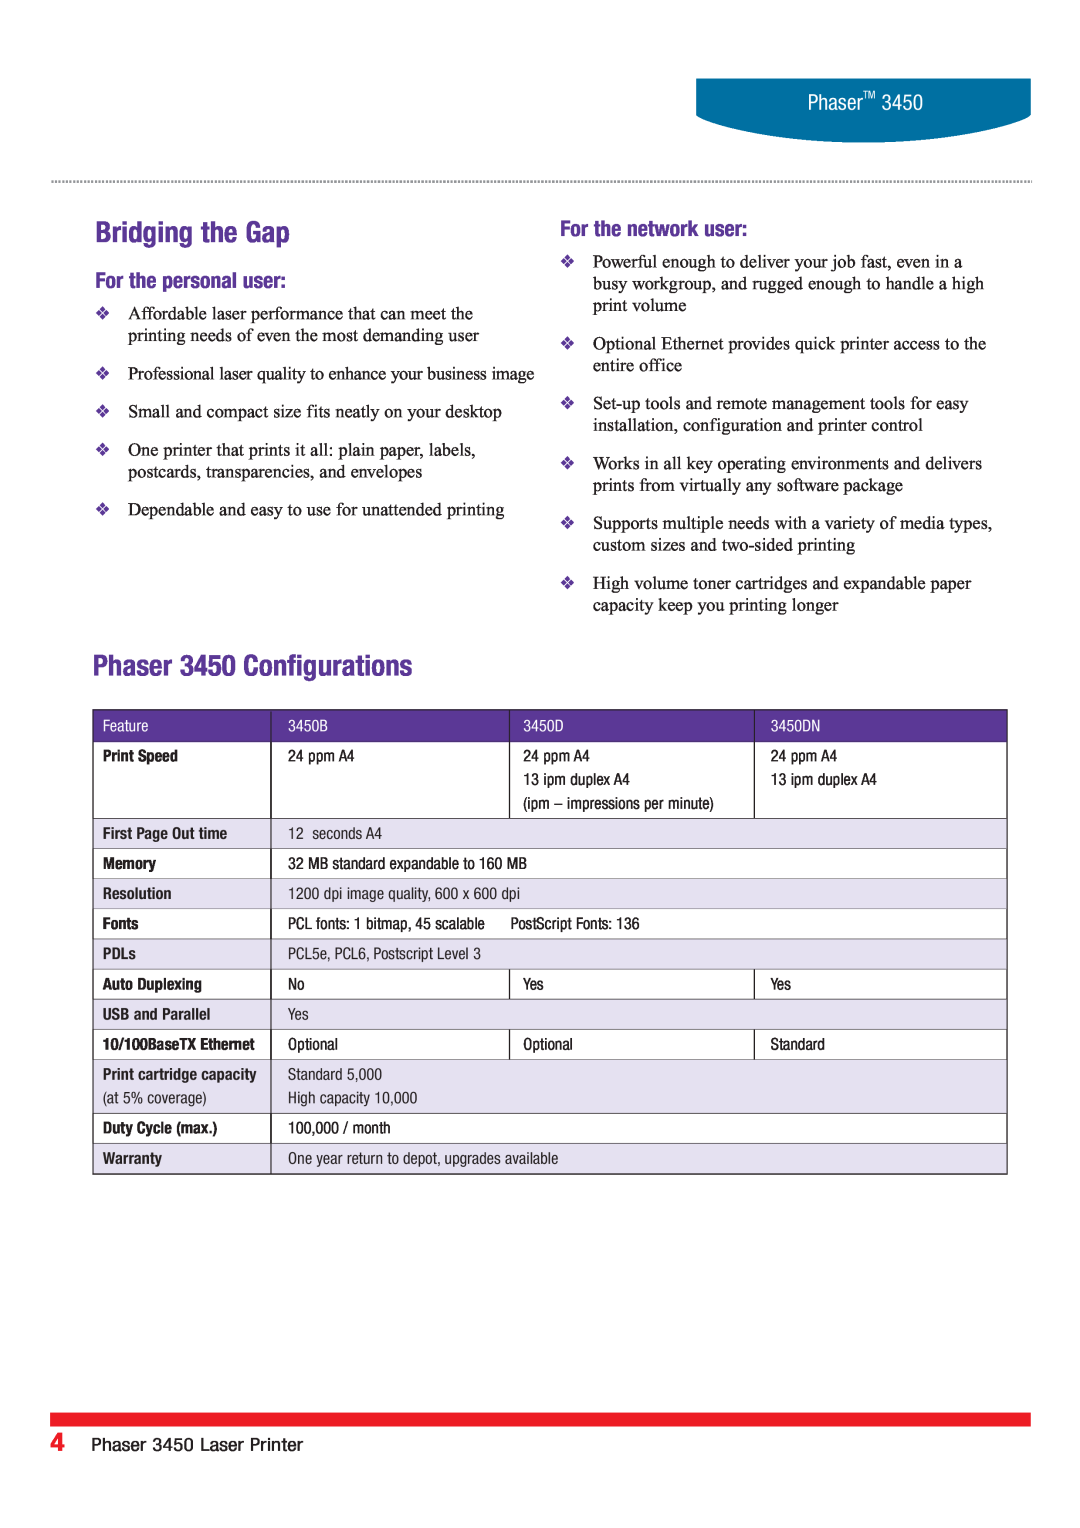 Xerox manual Bridging the Gap, Phaser 3450 Configurations, For the personal user, For the network user, PhaserTM 